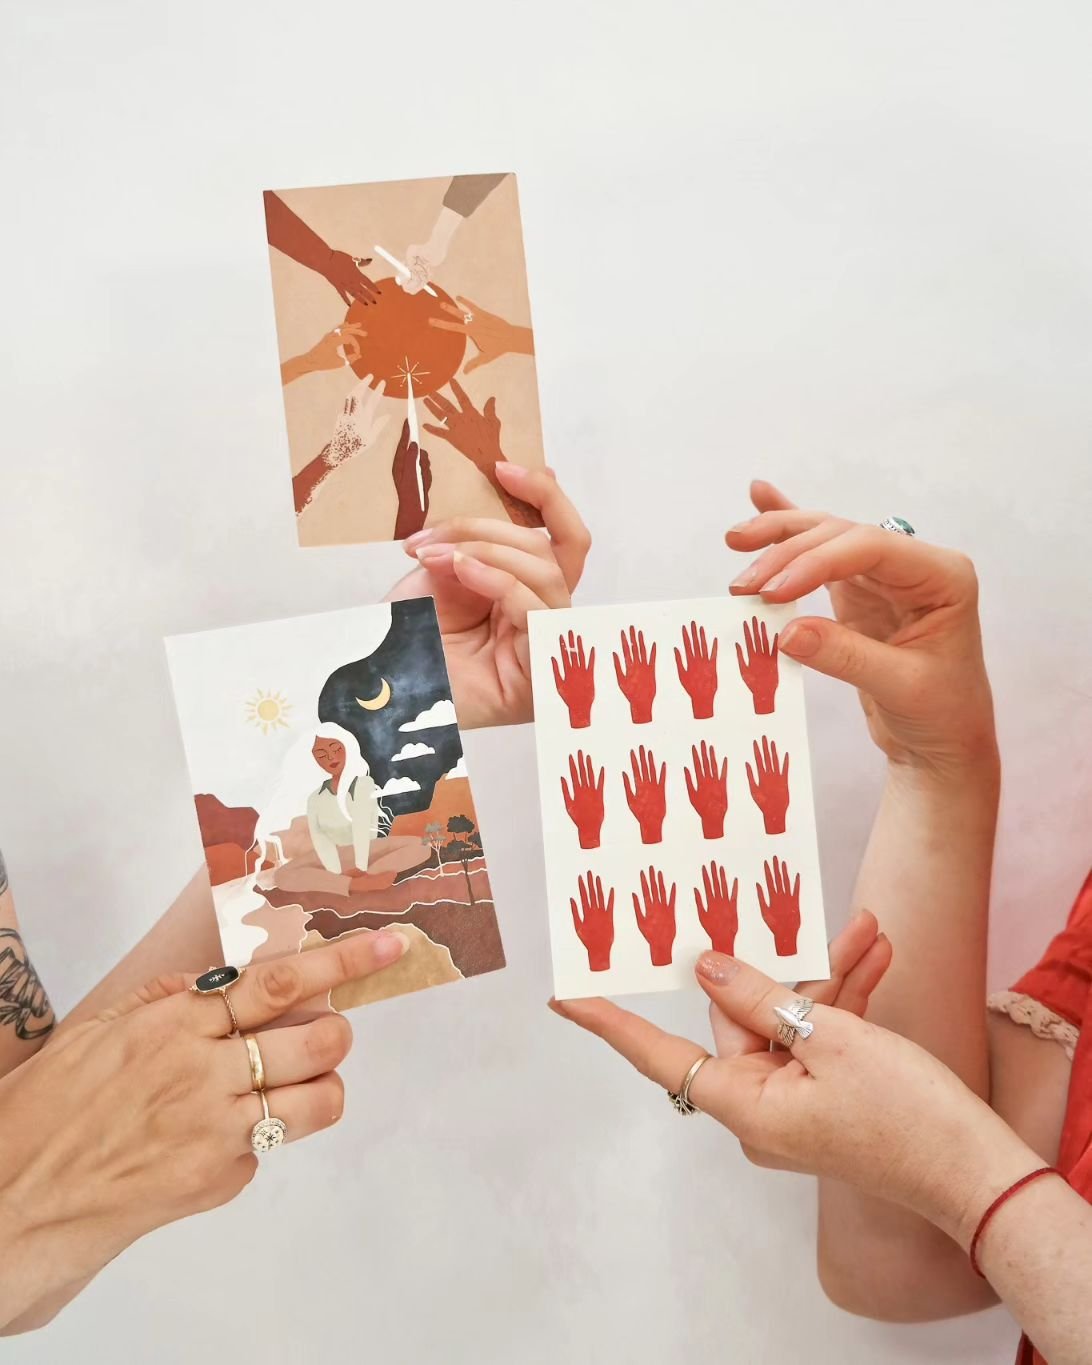 ✋️👌🫷👉🫴🫲
Hands Hands Hands

How many of our postcards have you collected? 
We try to release a new postcard design every quarter, so if you are a regular workshop attendee, you may have all our designs! 

Did you know we do Gift Cards? They are d